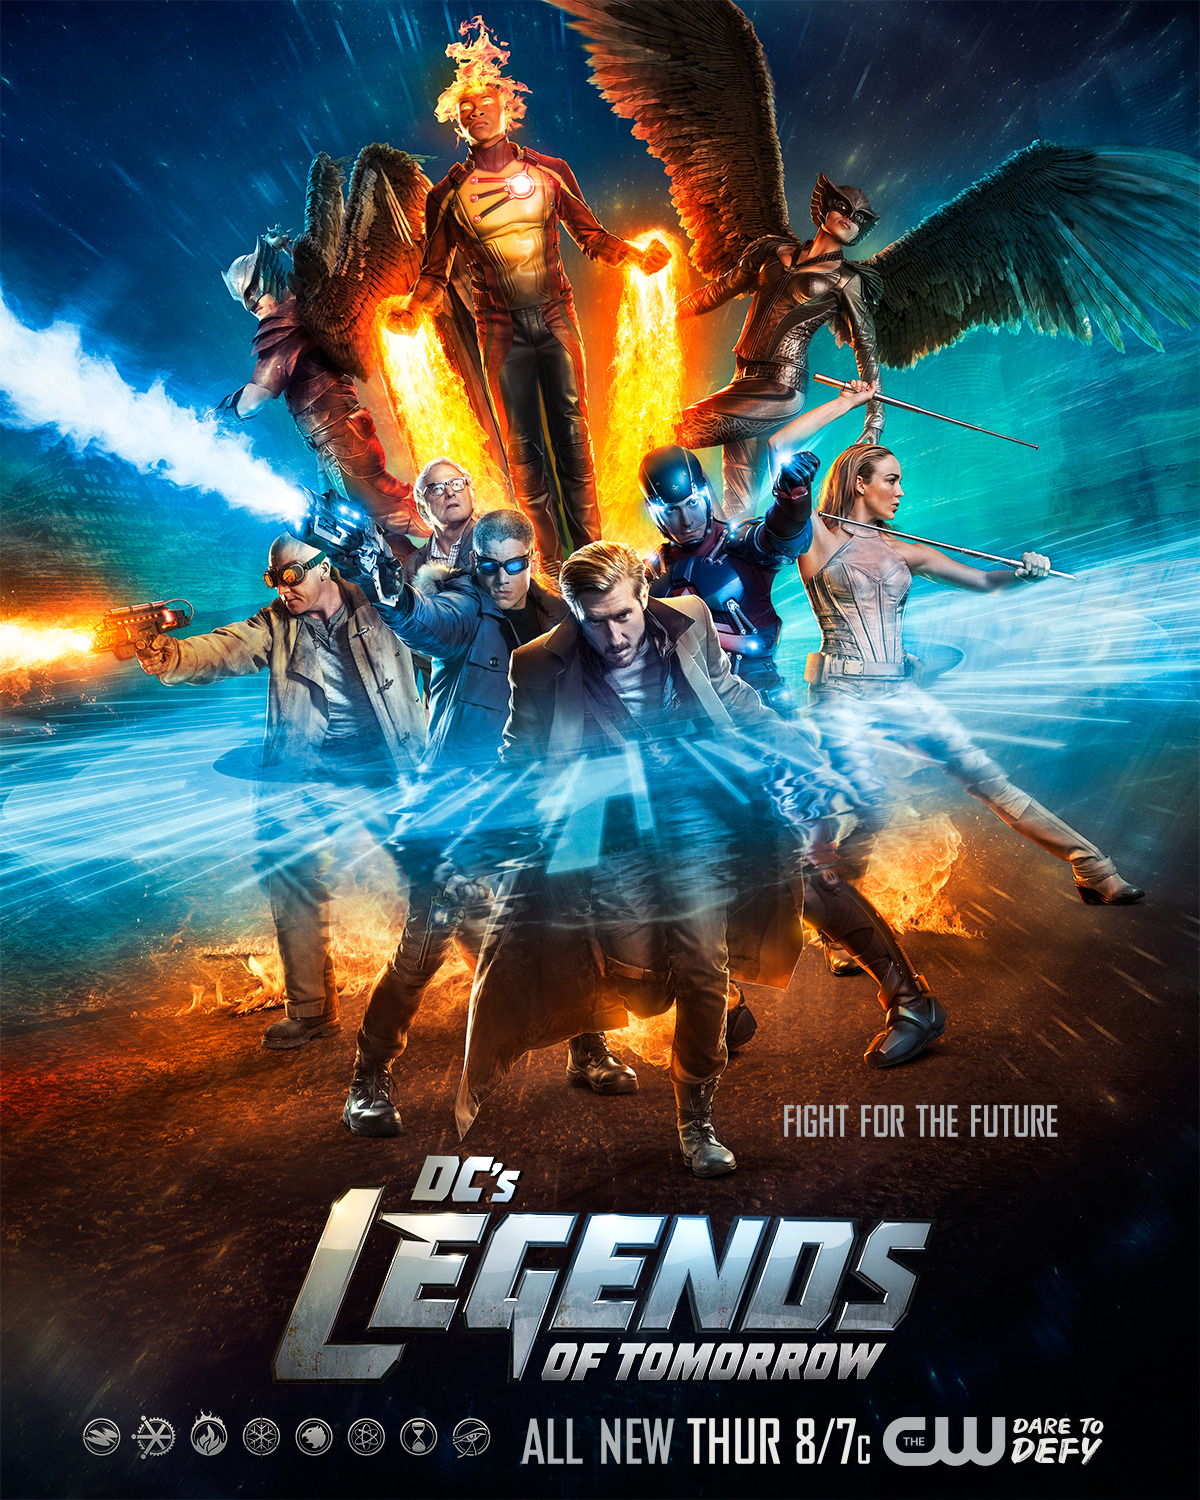 DCs_legends_of_tonorrow_poster_large